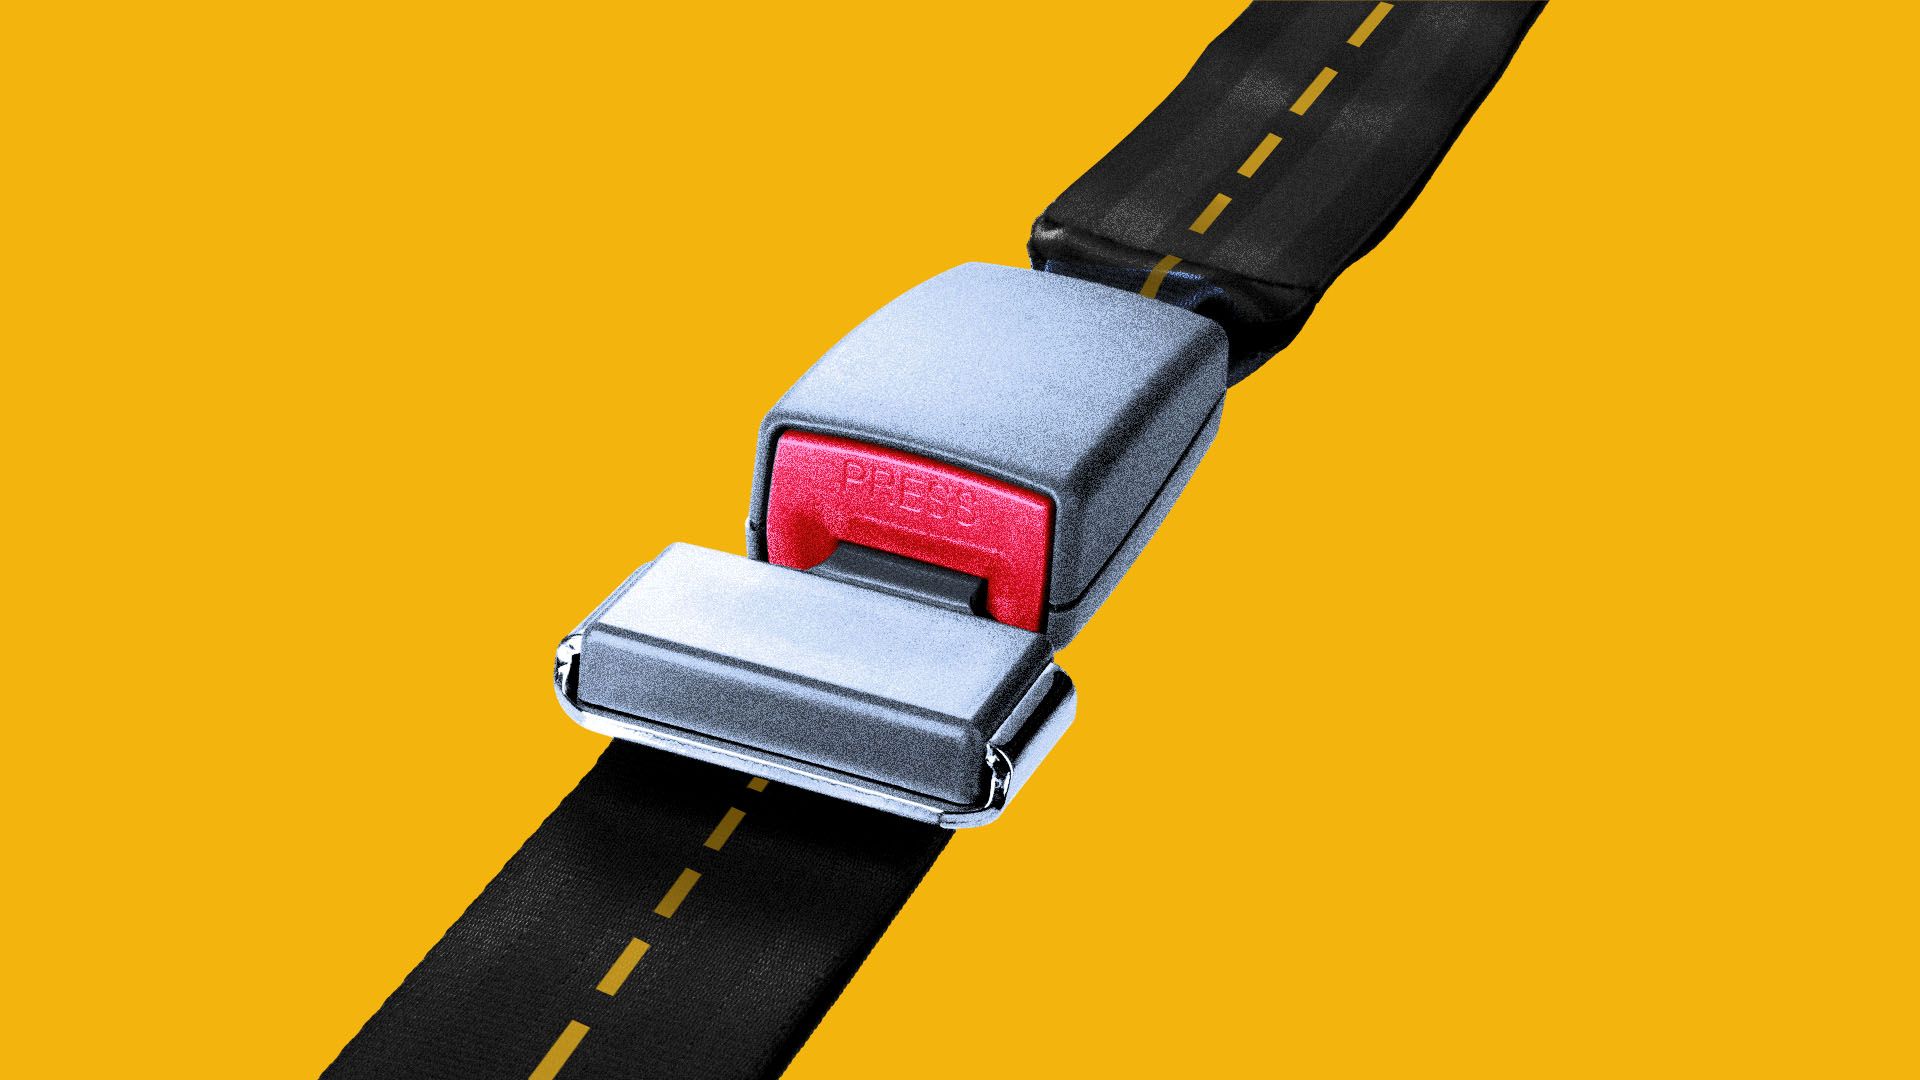 Illustration of a seat belt with a yellow road markings